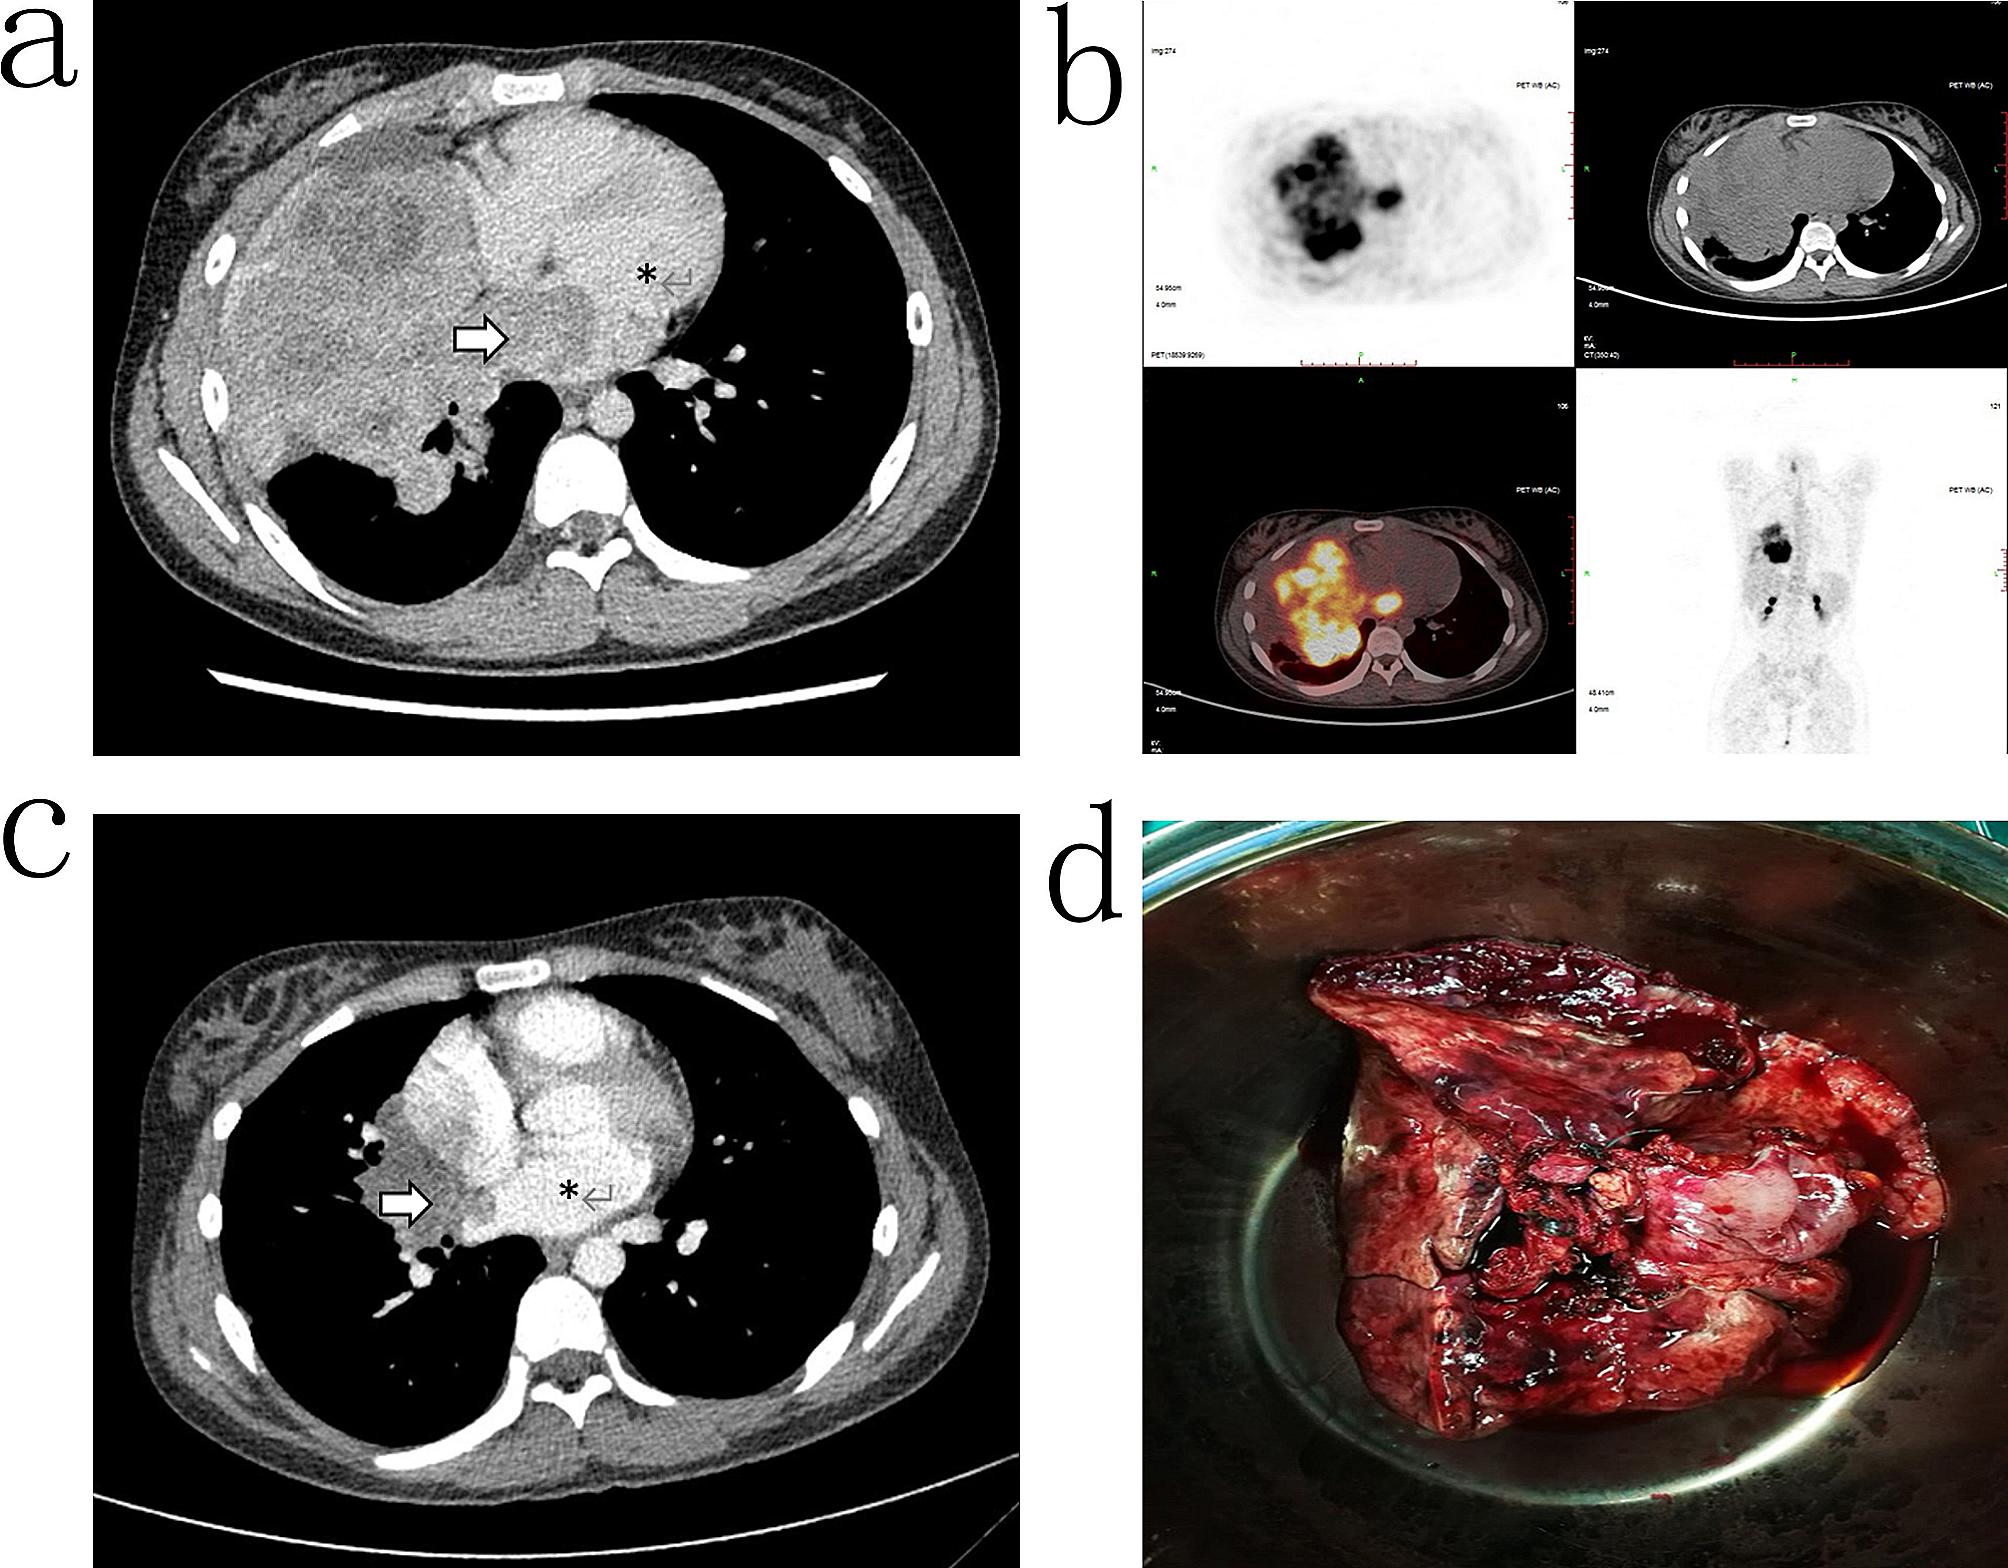 Operative treatment of pulmonary primitive neuroectodermal tumor: a case report and literature review